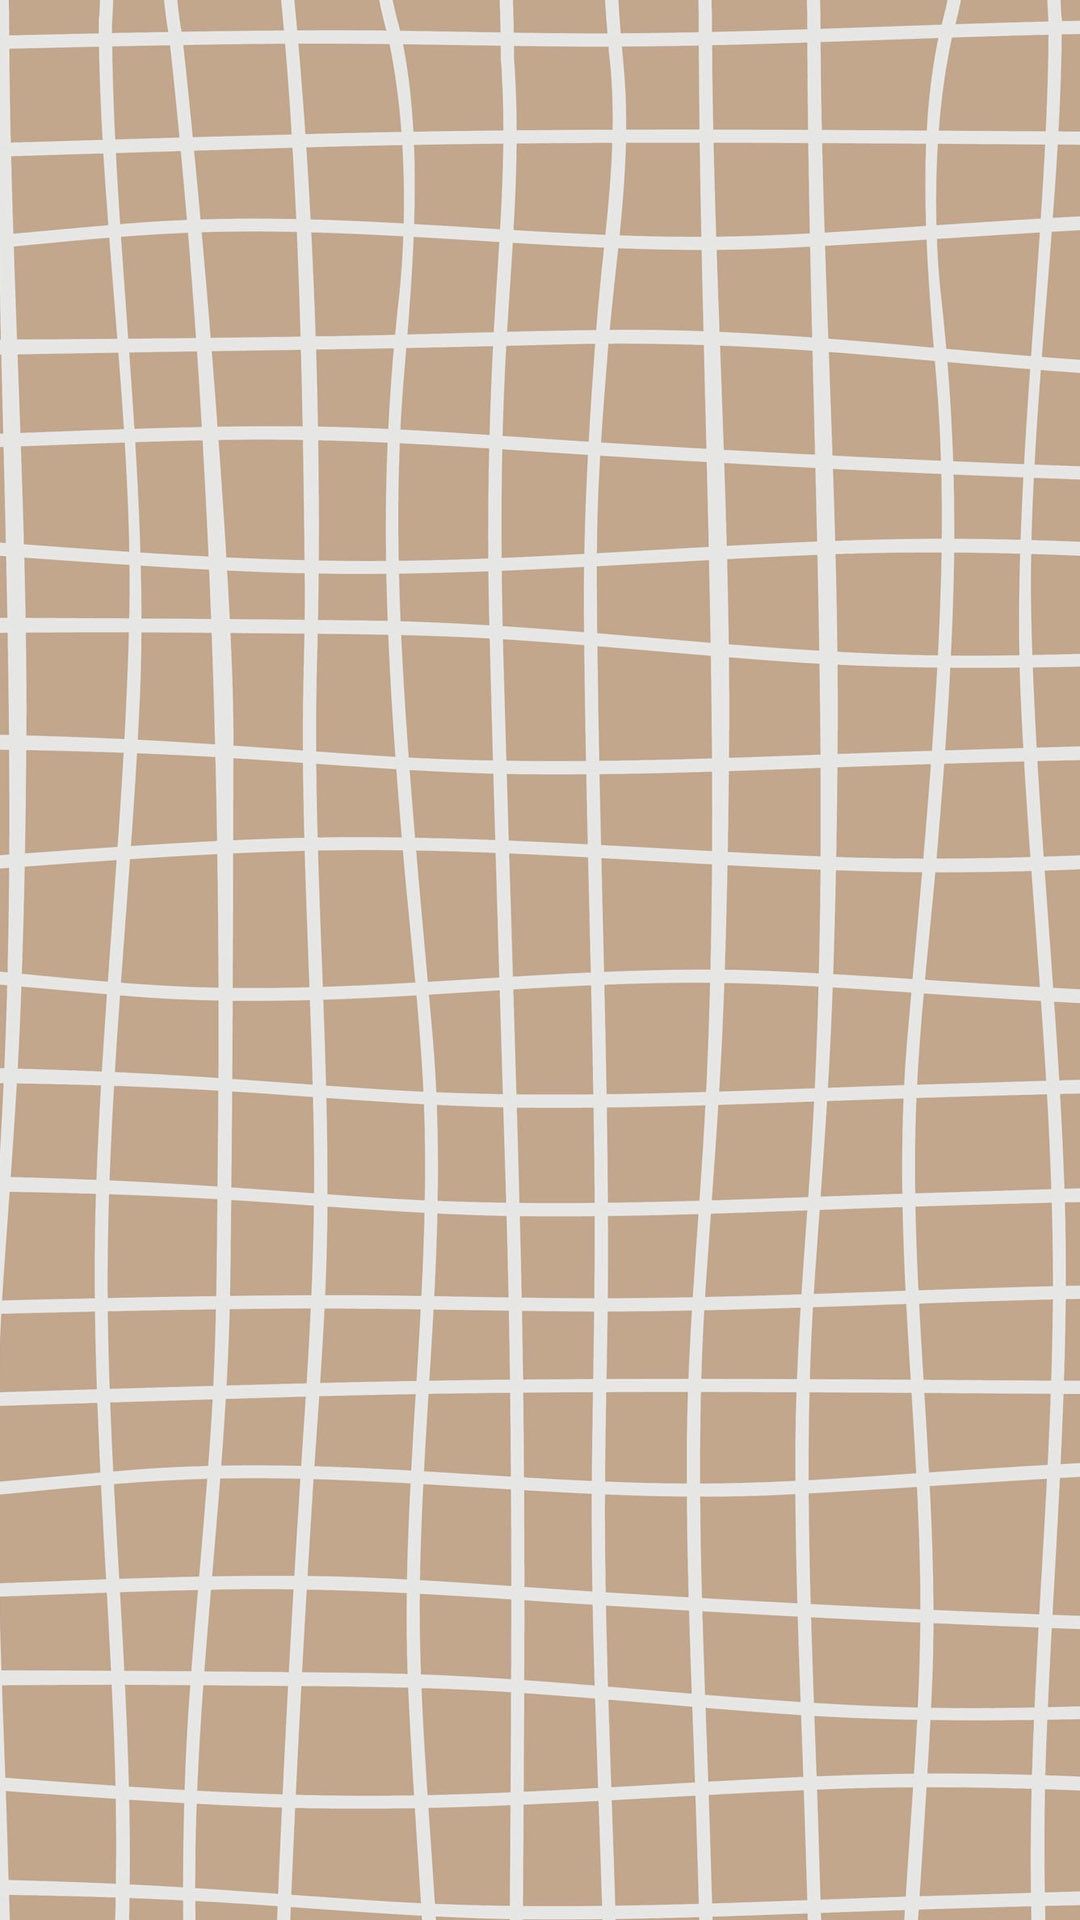 IPhone wallpaper with a brown grid pattern - Grid